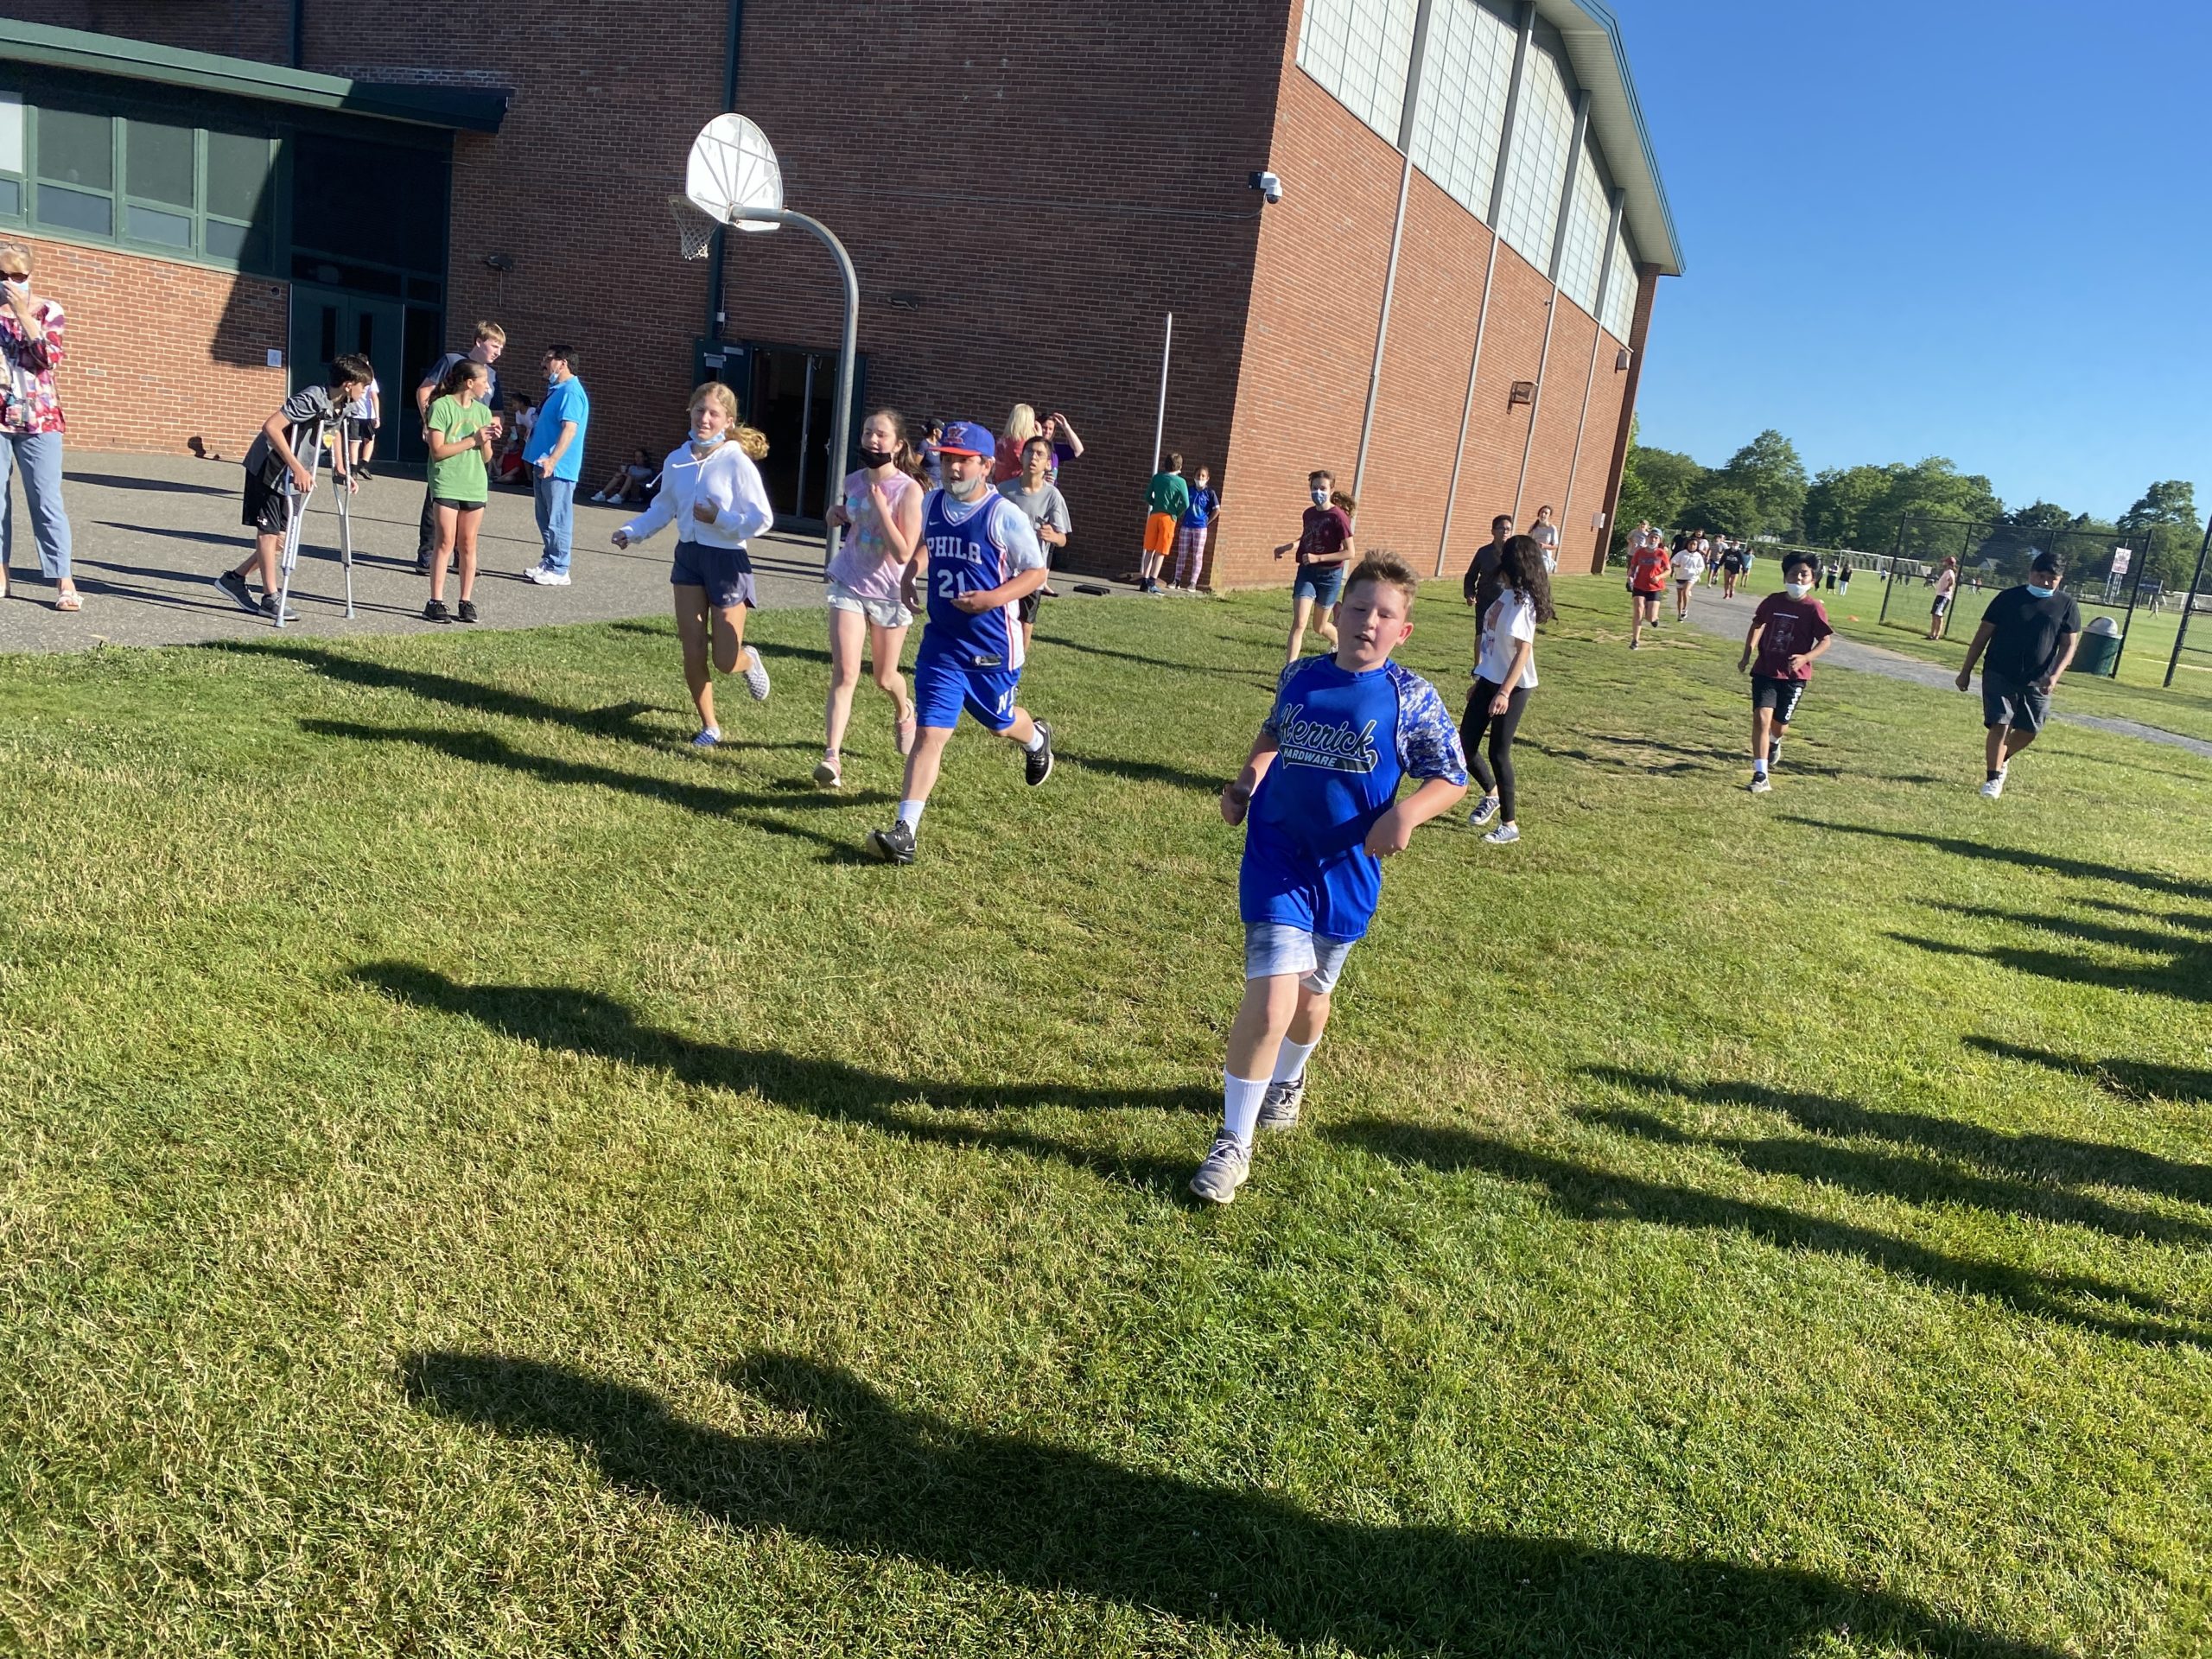 Southampton Intermediate School students and faculty raised more than $3,000 to benefit the Heart of the Hamptons on June 25. The funds were raised through the school’s annual Run Against Hunger fun run, where students and staff enjoyed fresh air while raising awareness and funds for the cause.